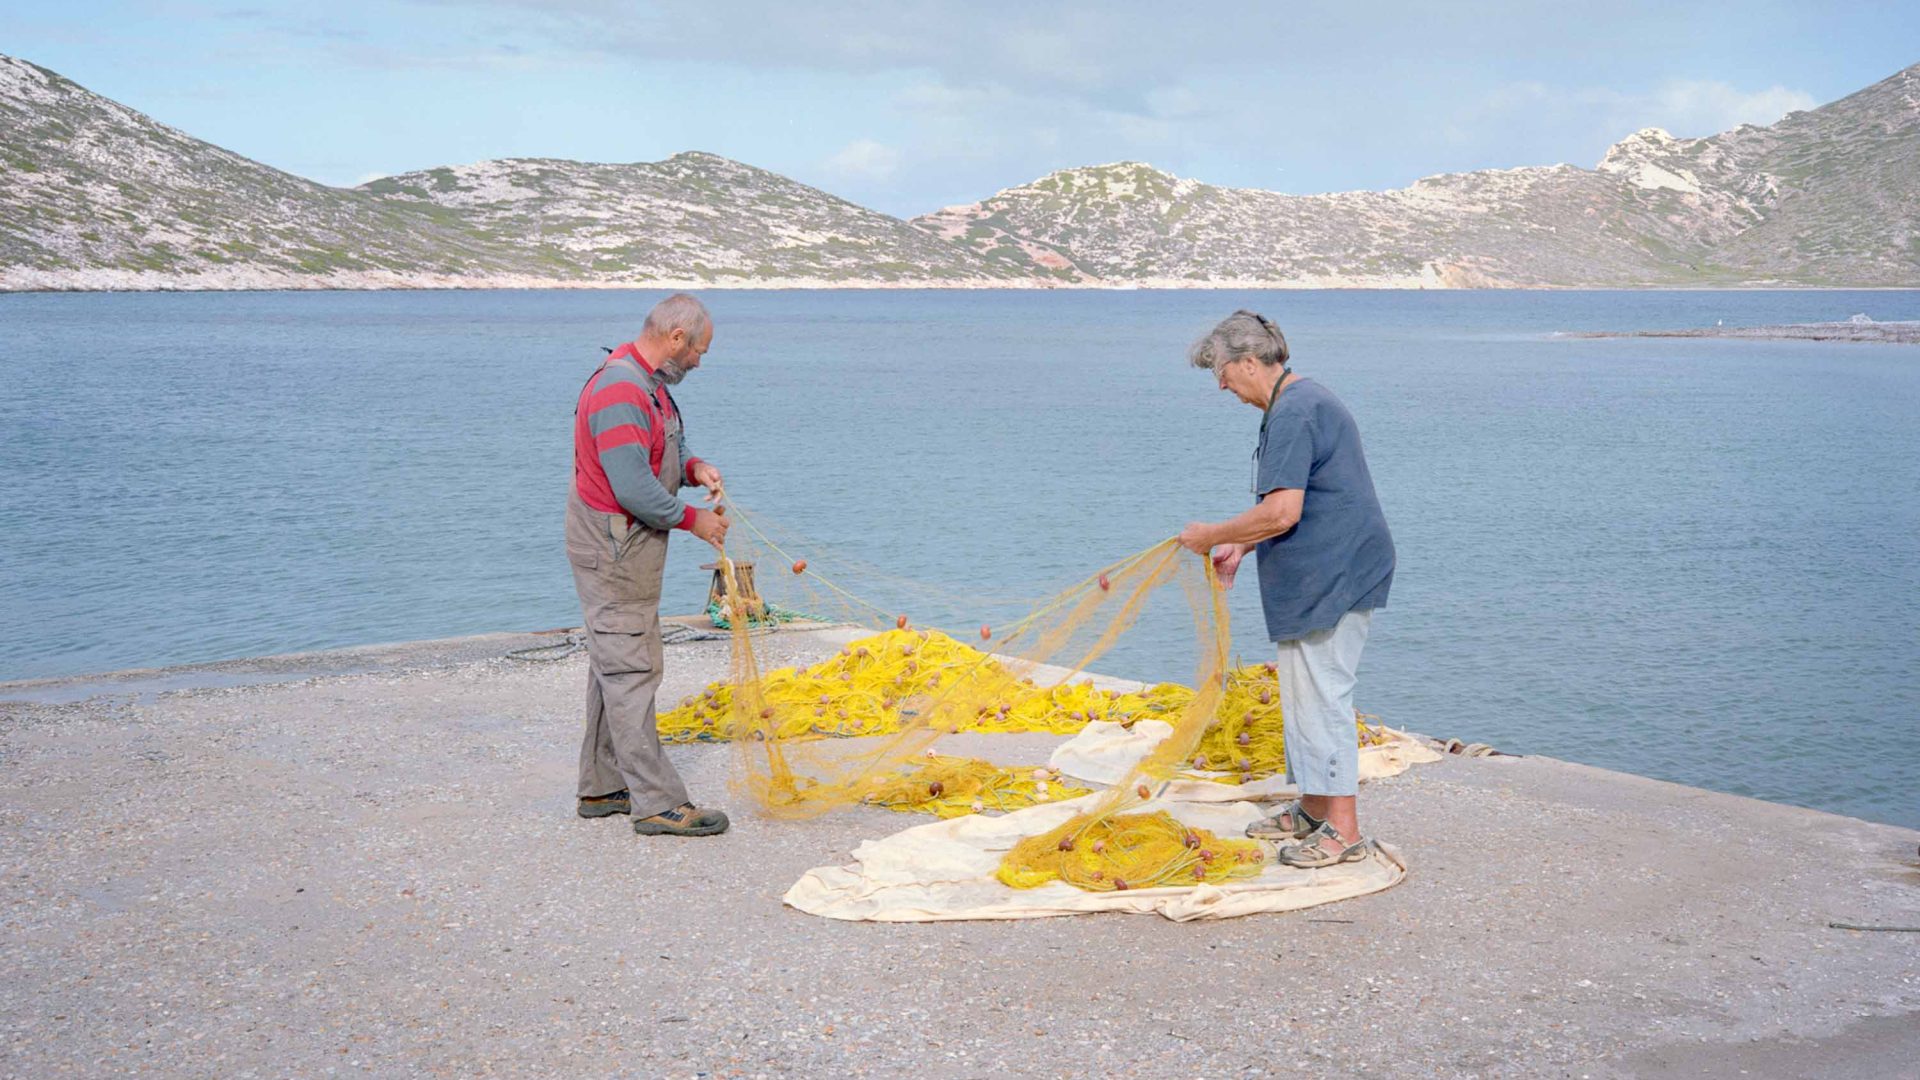 Two people work to untangle a fishing net by the sea.